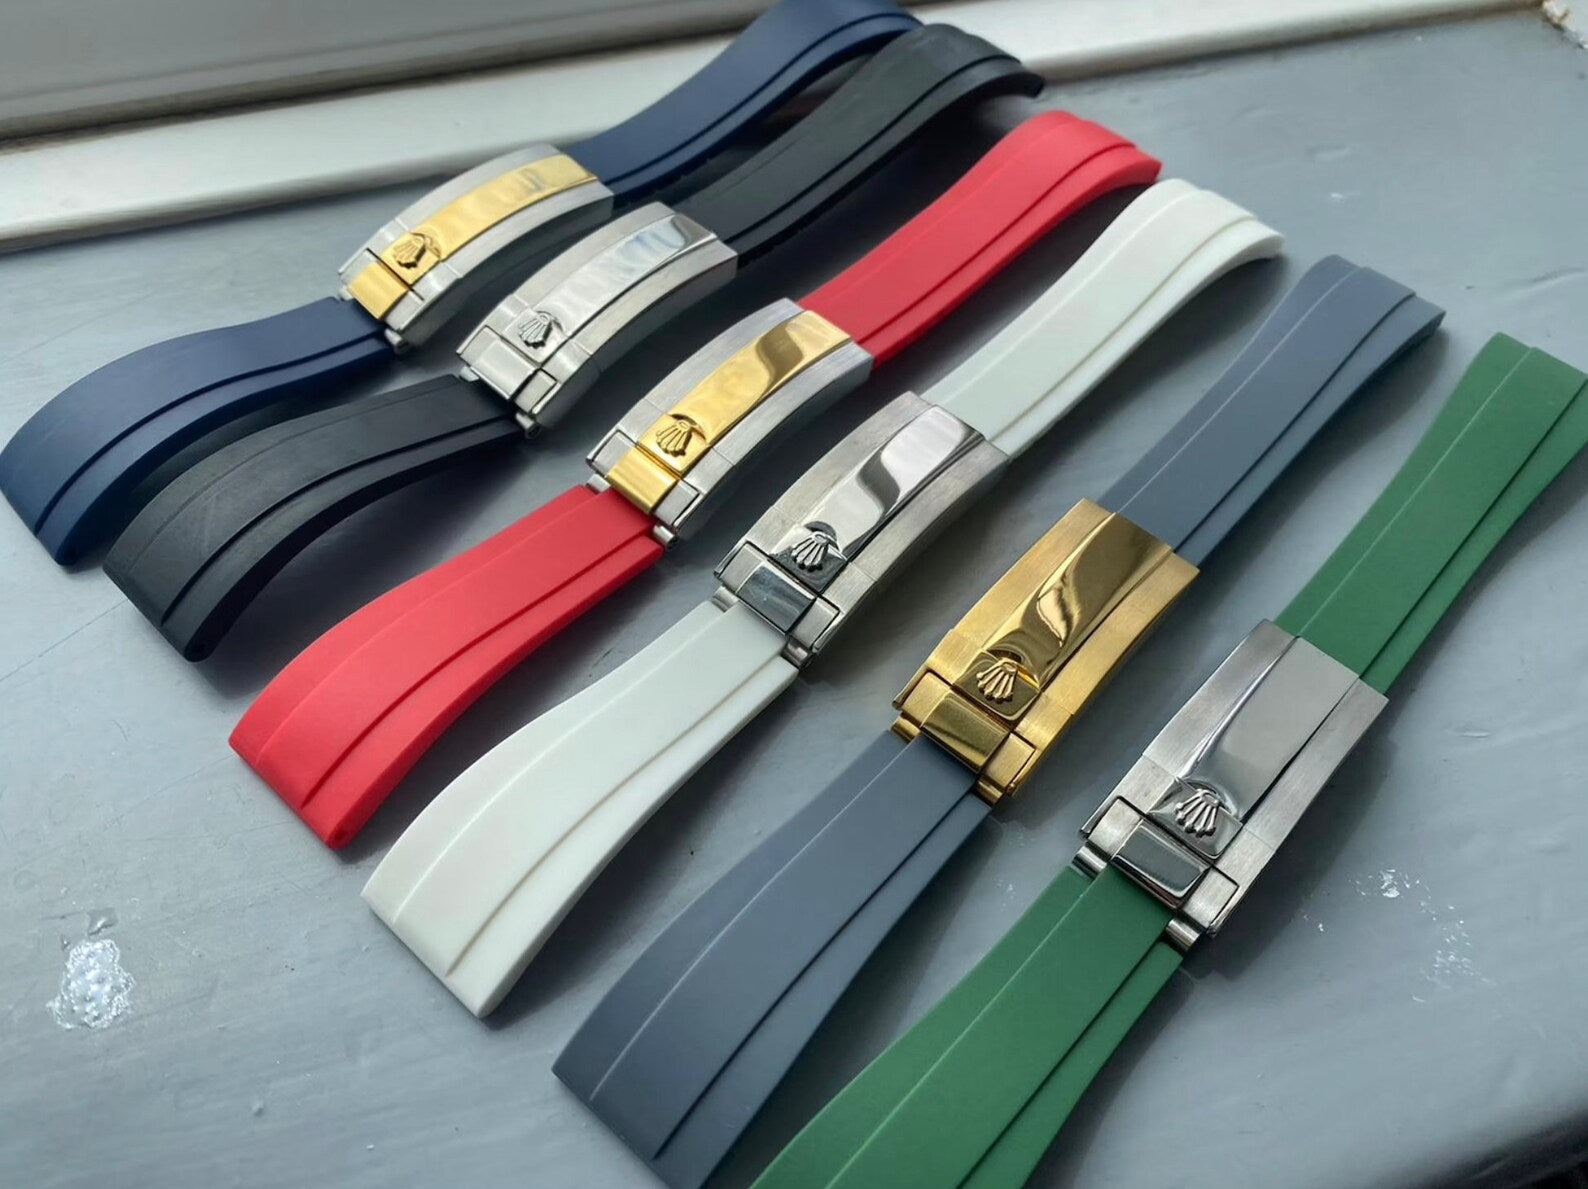 Looking for a Jubilee & an Oyster flex(Rubber) Bracelet kind of a strap for  this one with Buckle, Please can anyone suggest me options which  aftermarket brand would be an ideal fit?